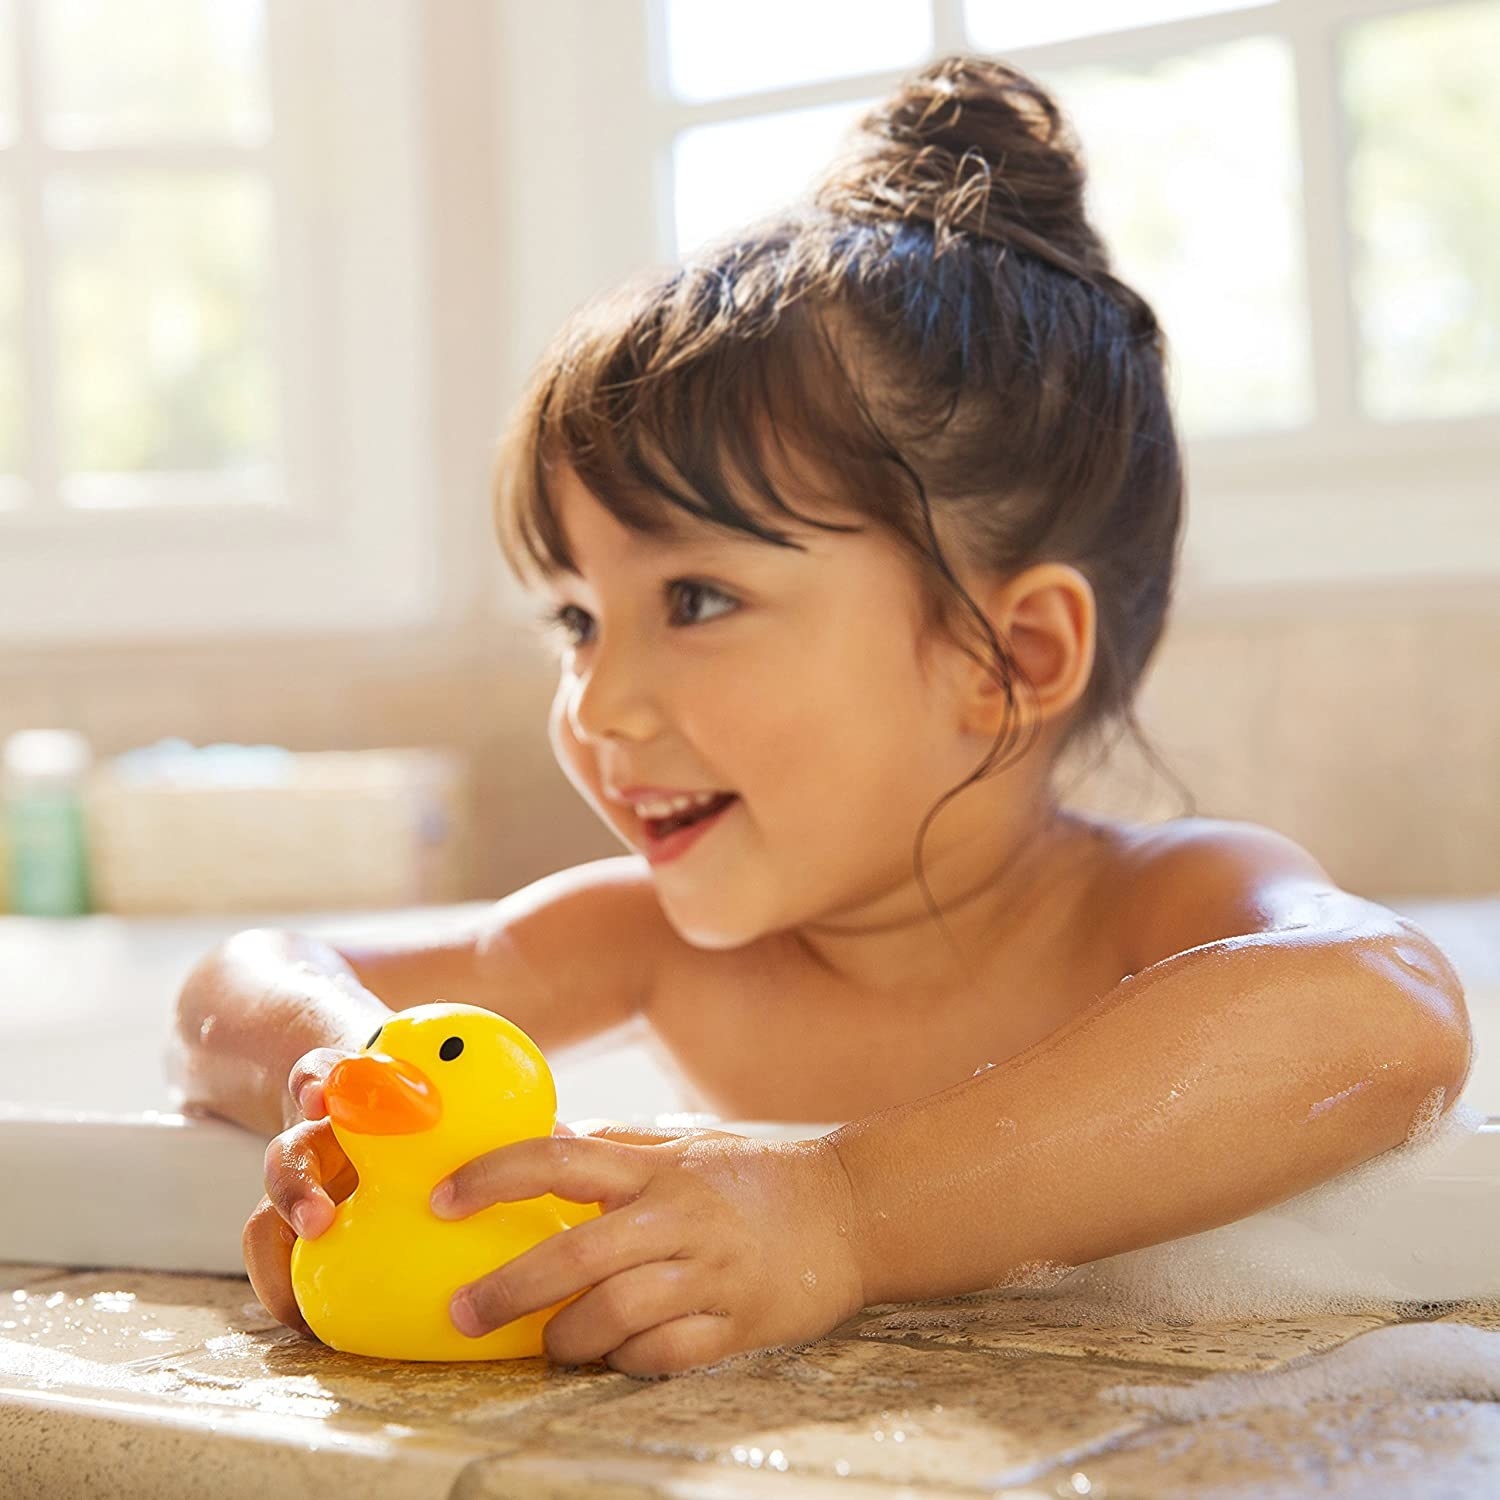 A kid holding the ducky in a bath